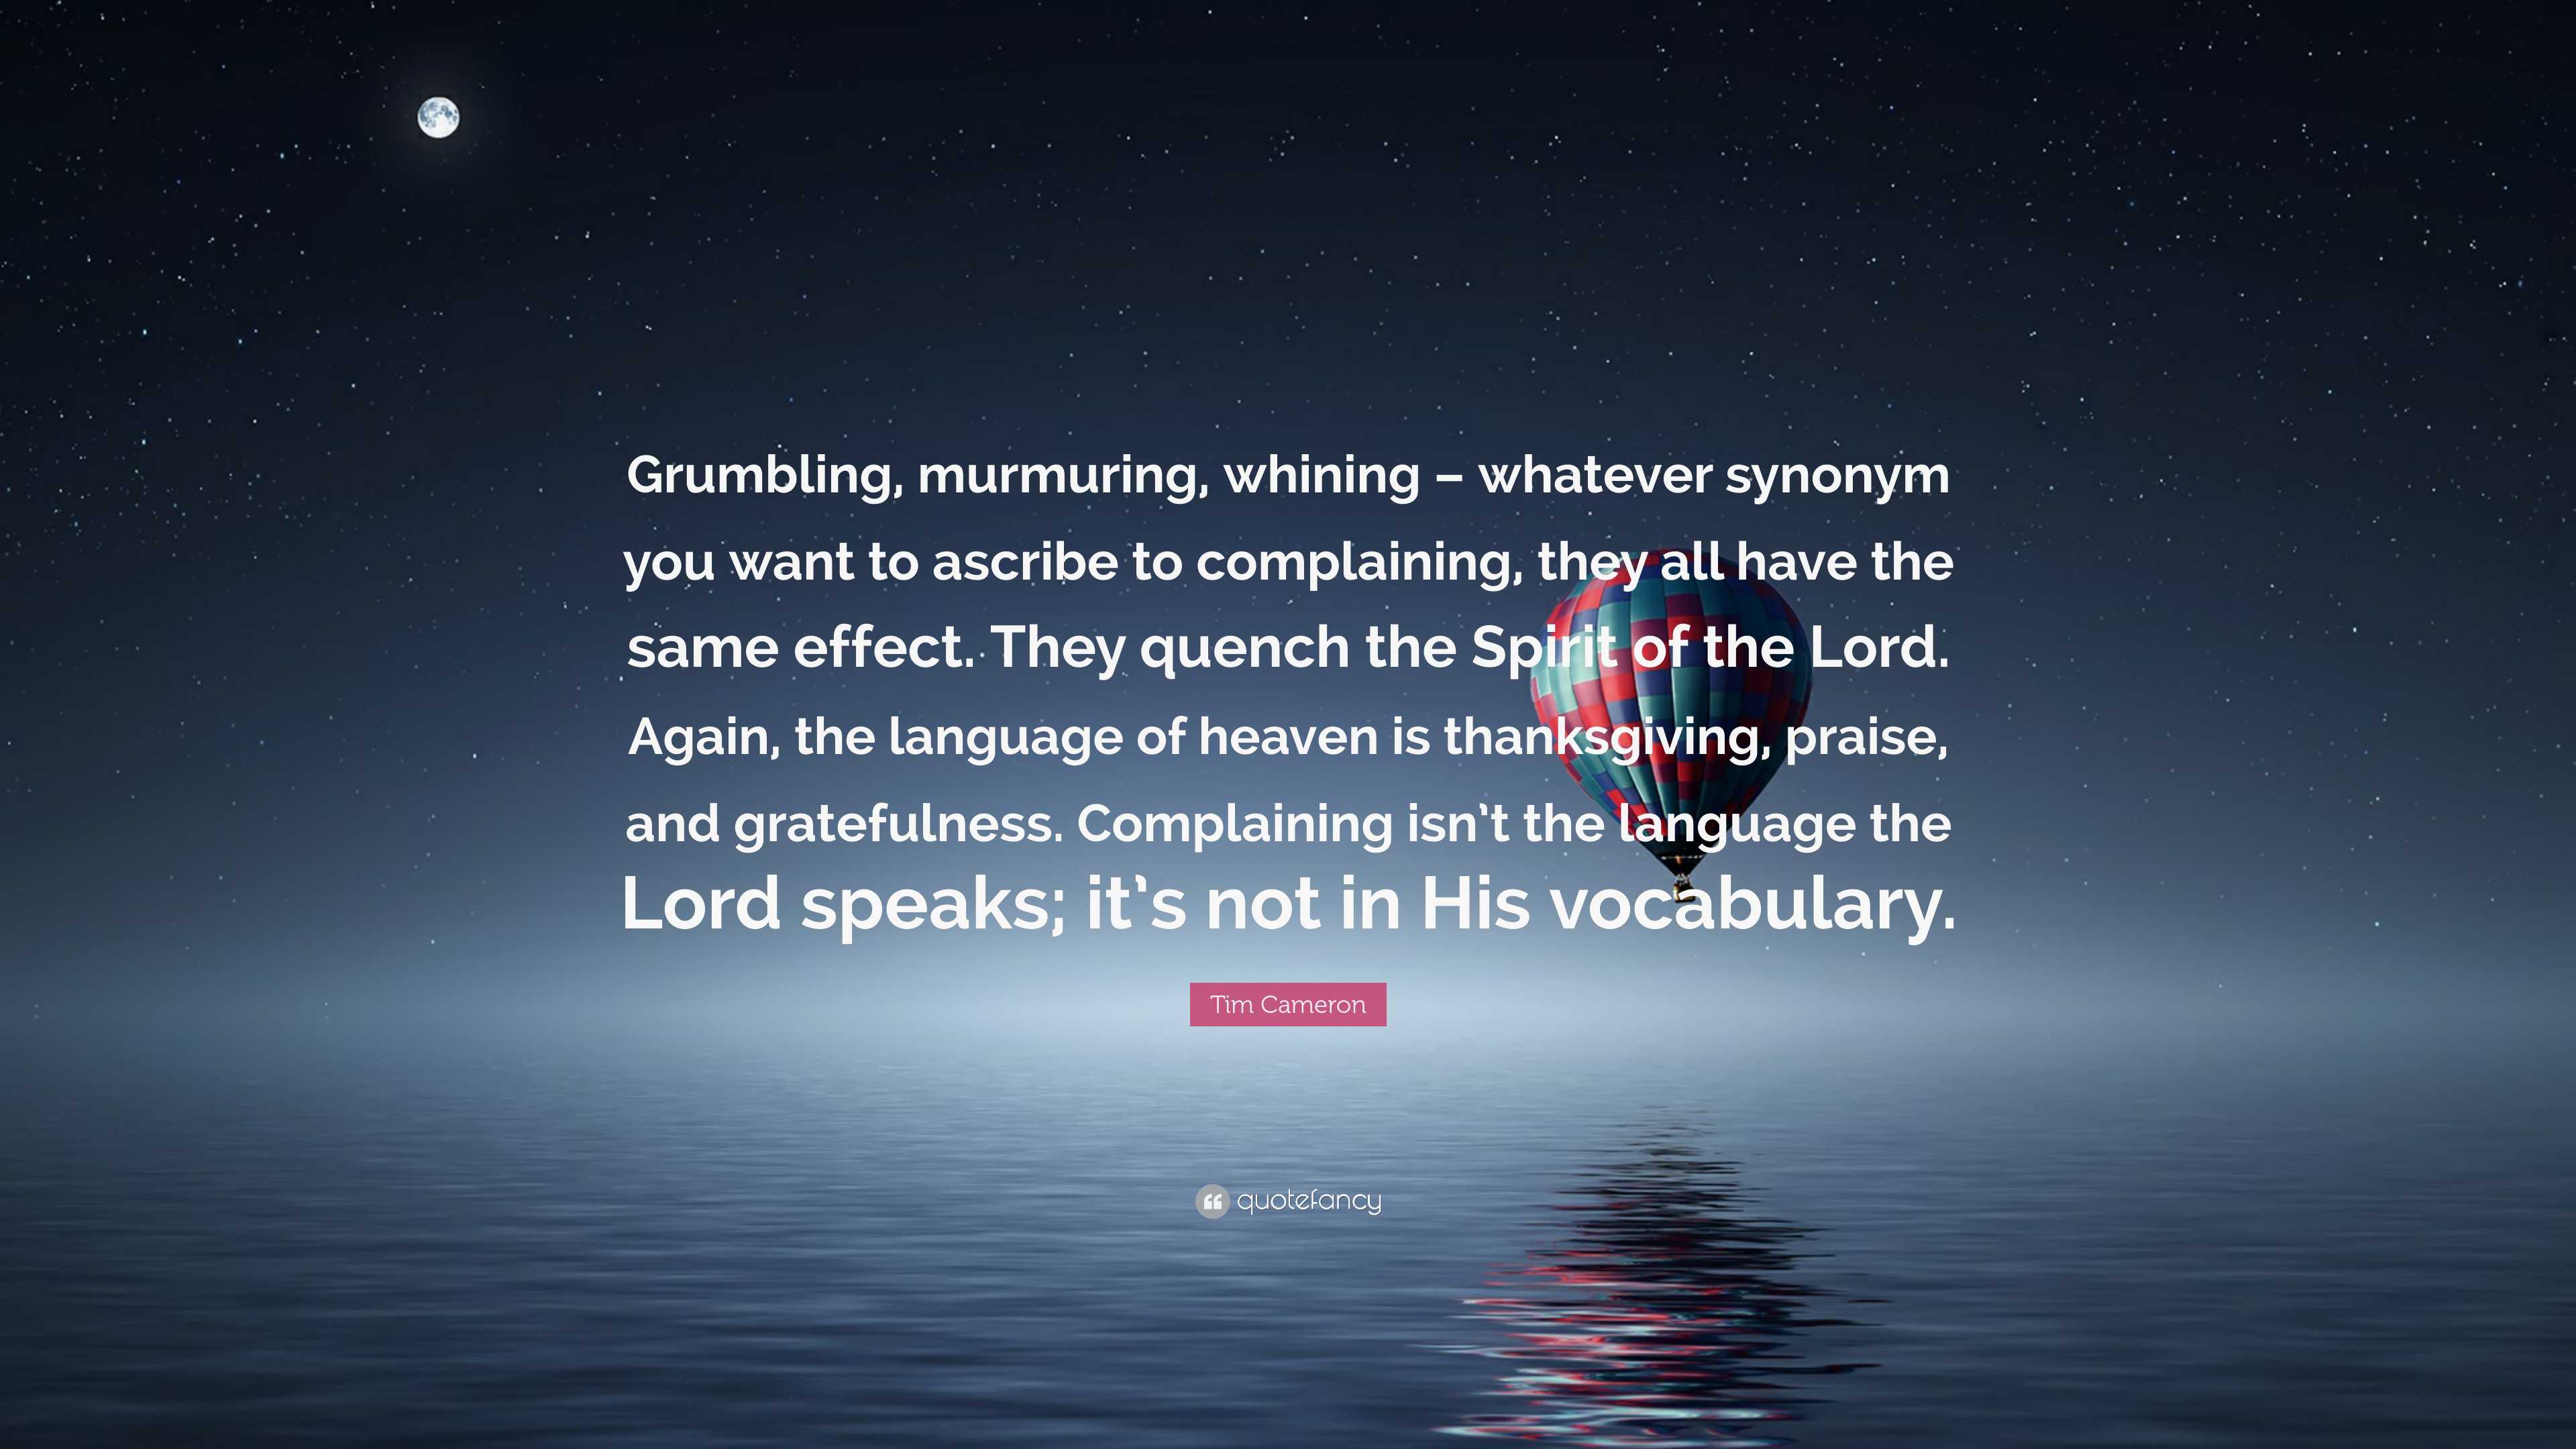 Tim Cameron Quote: “Grumbling, murmuring, whining – whatever synonym you  want to ascribe to complaining, they all have the same effect. They”